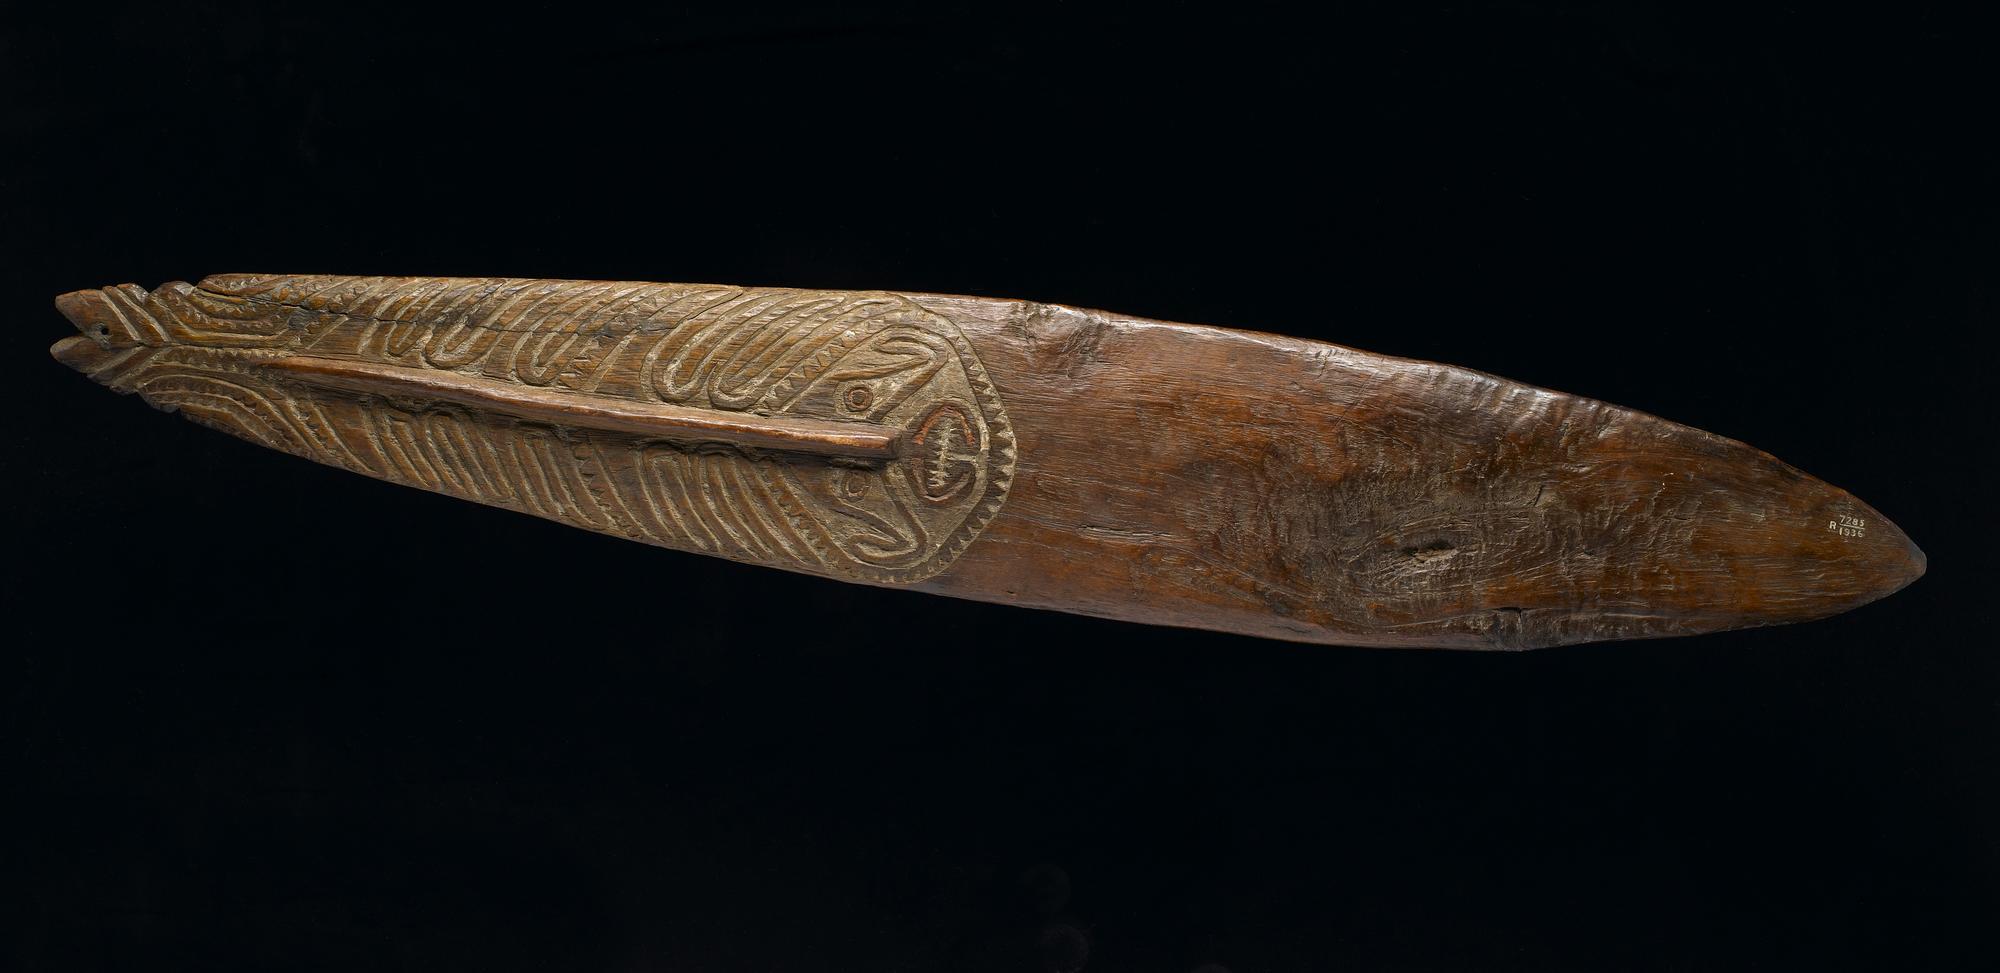 Bullroarer made of wood, carved with designs, including a human face, and decorated with pigment: Oceania, Melanesia, Papua New Guinea, Gulf Region, 19th century.